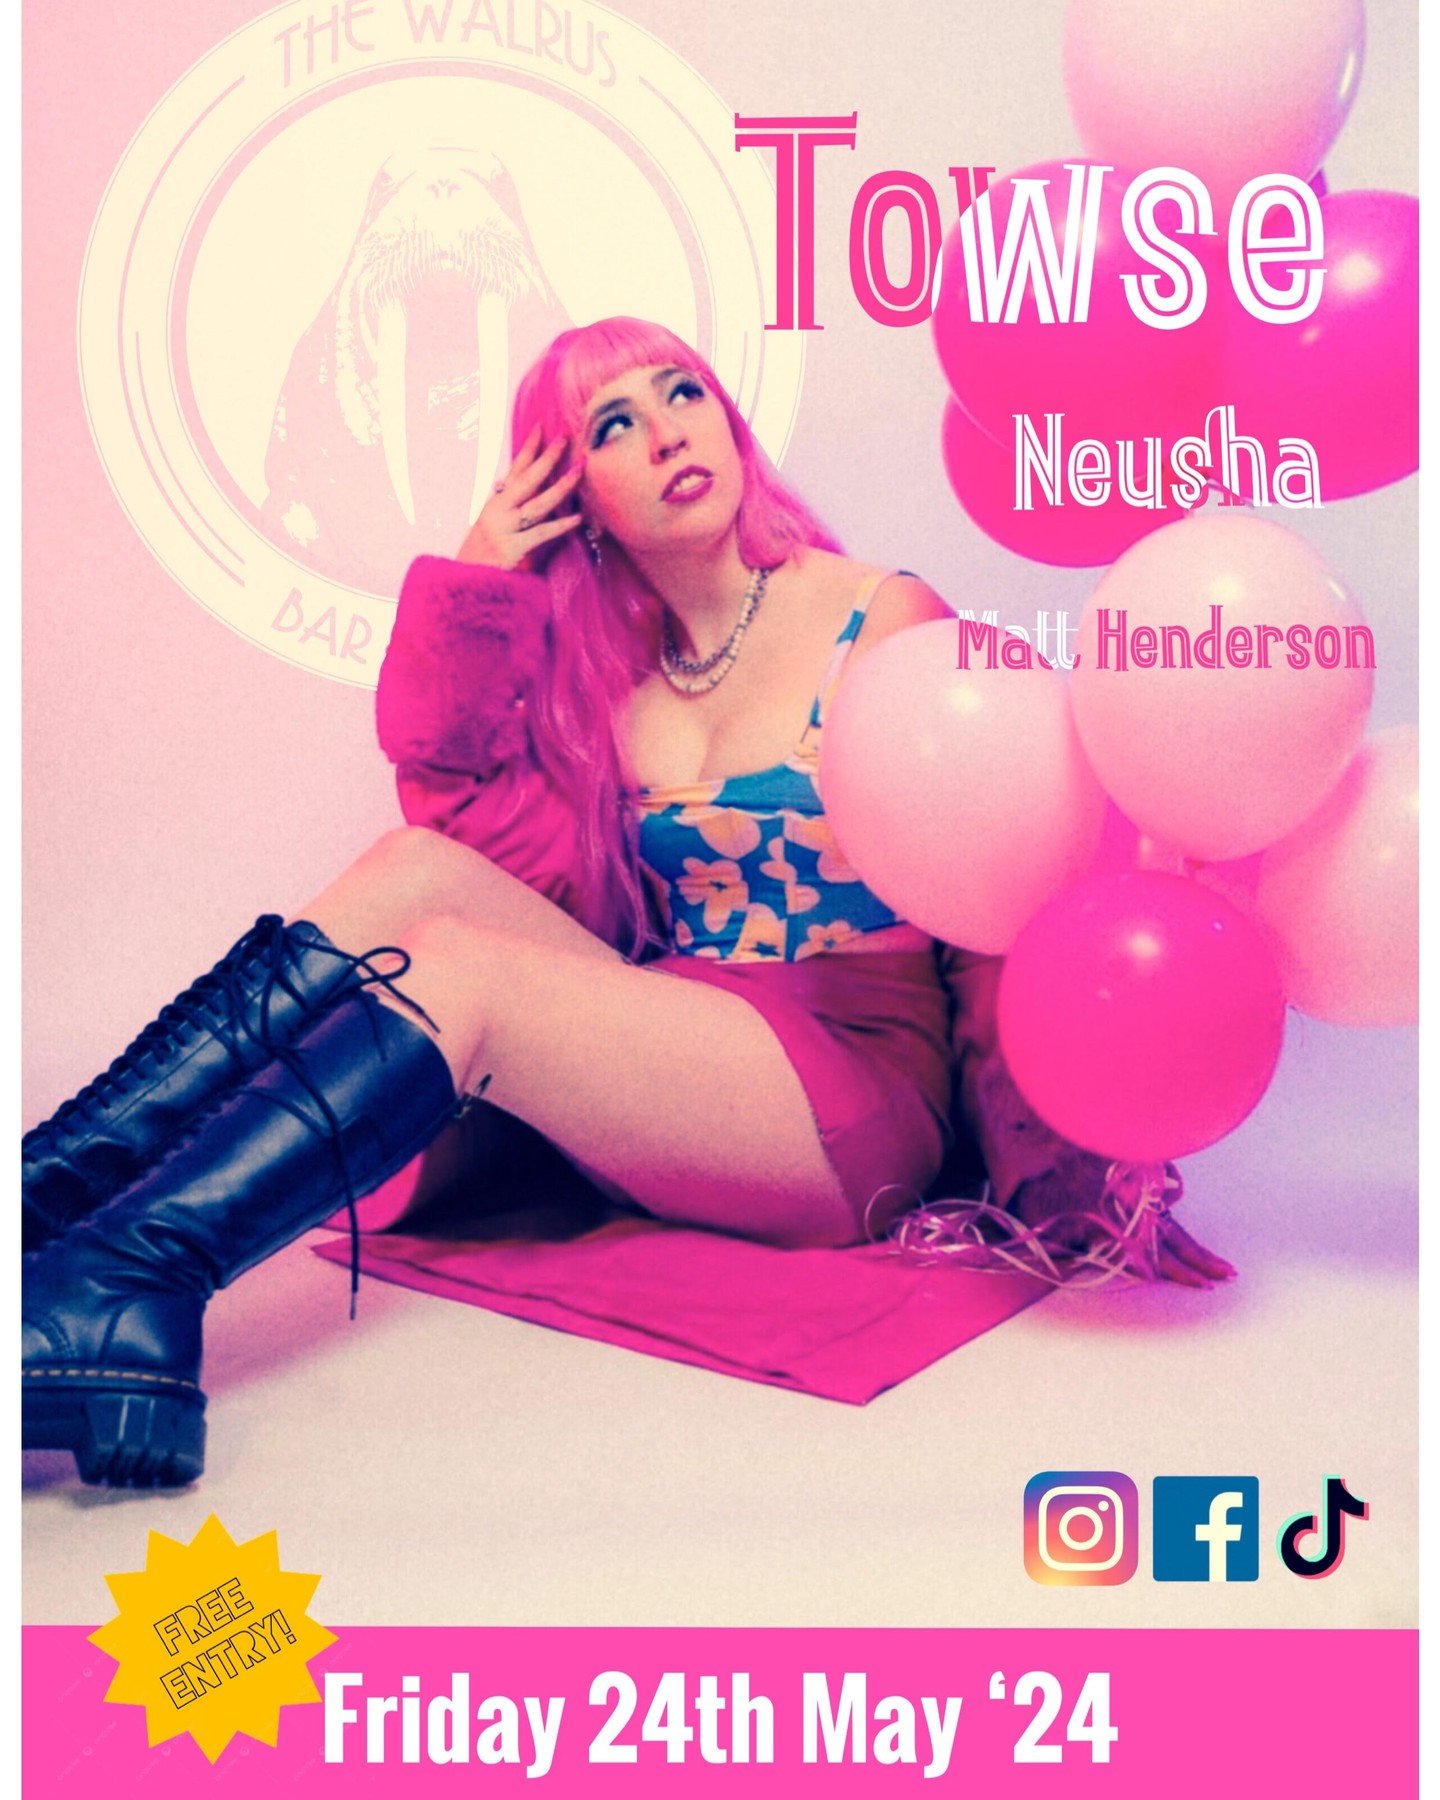 Join us on Friday 24th May for an evening of emerging talent, featuring Towse, Neusha and Matt Henderson! Starts @ 8:30pm